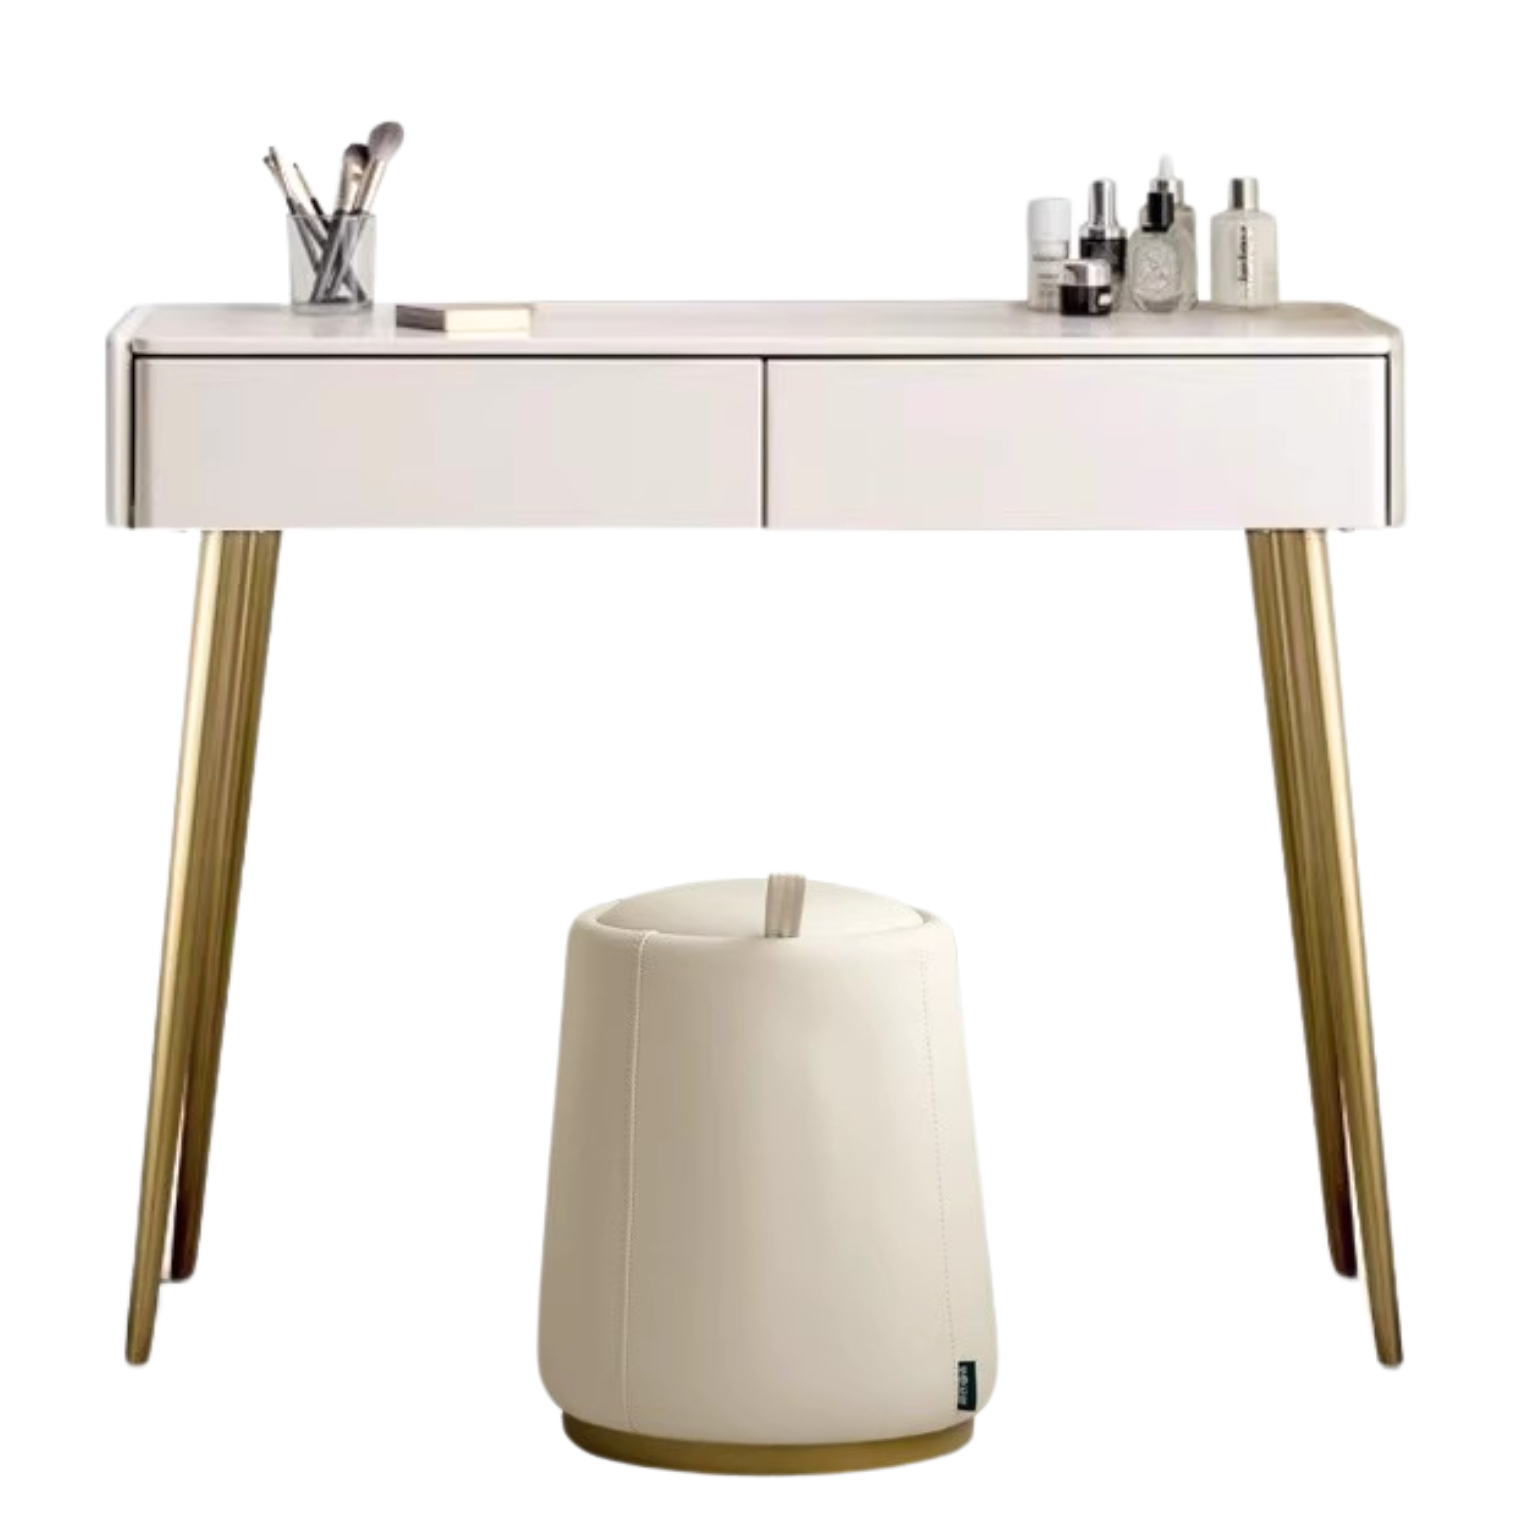 Poplar solid wood dressing table and cupboard integrated cream style: